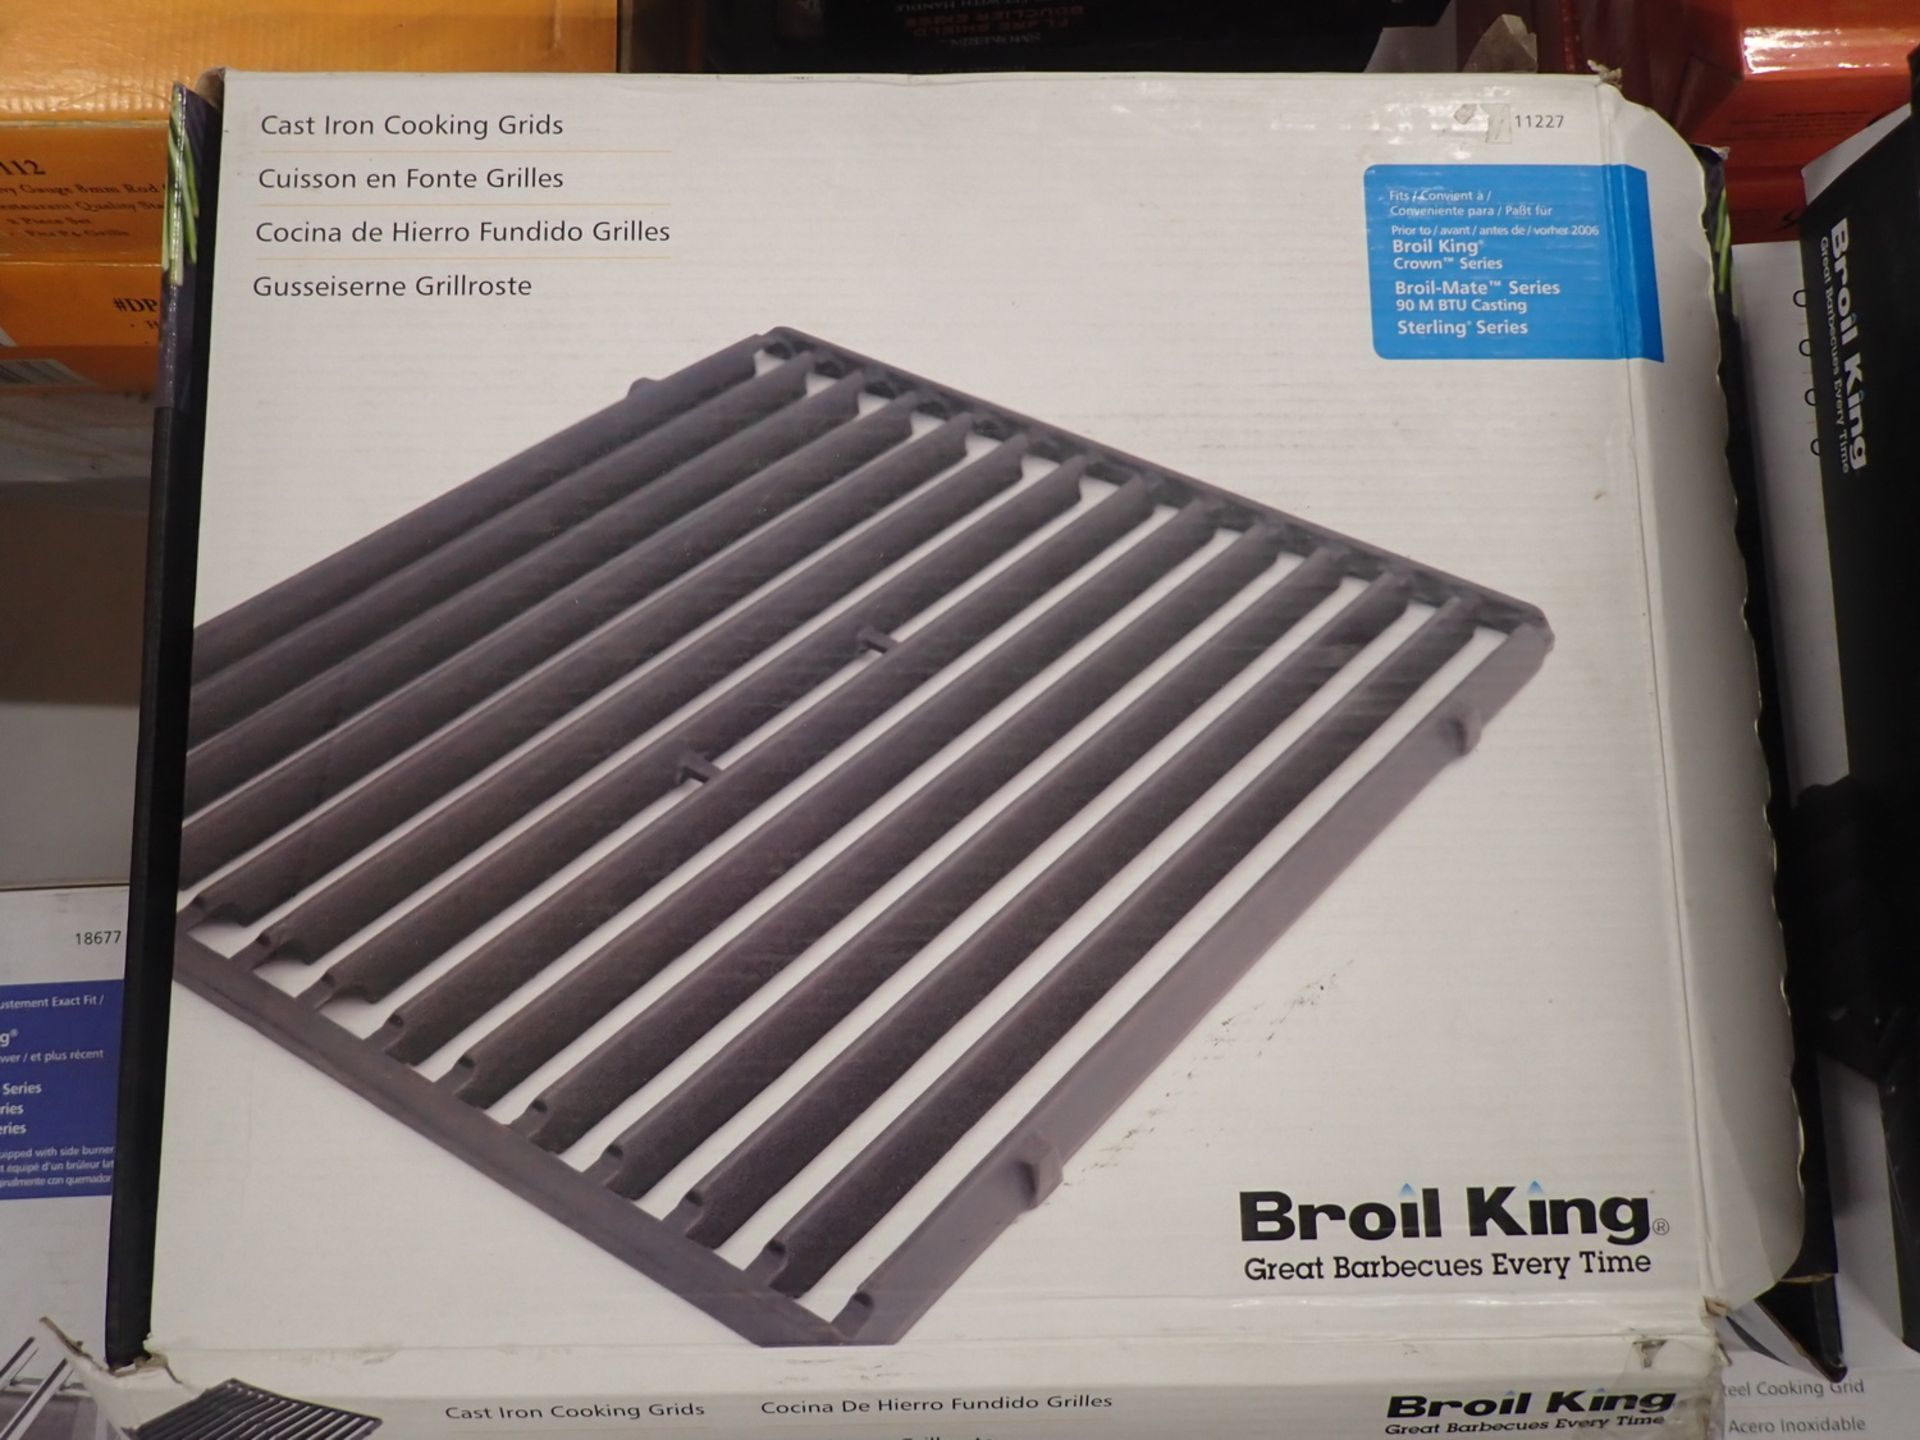 LOT - BROIL KING CAST IRON COOKING GRIDS - (6) 11219, (8) 11227, 11244, & (5) ASSTD - Image 4 of 6